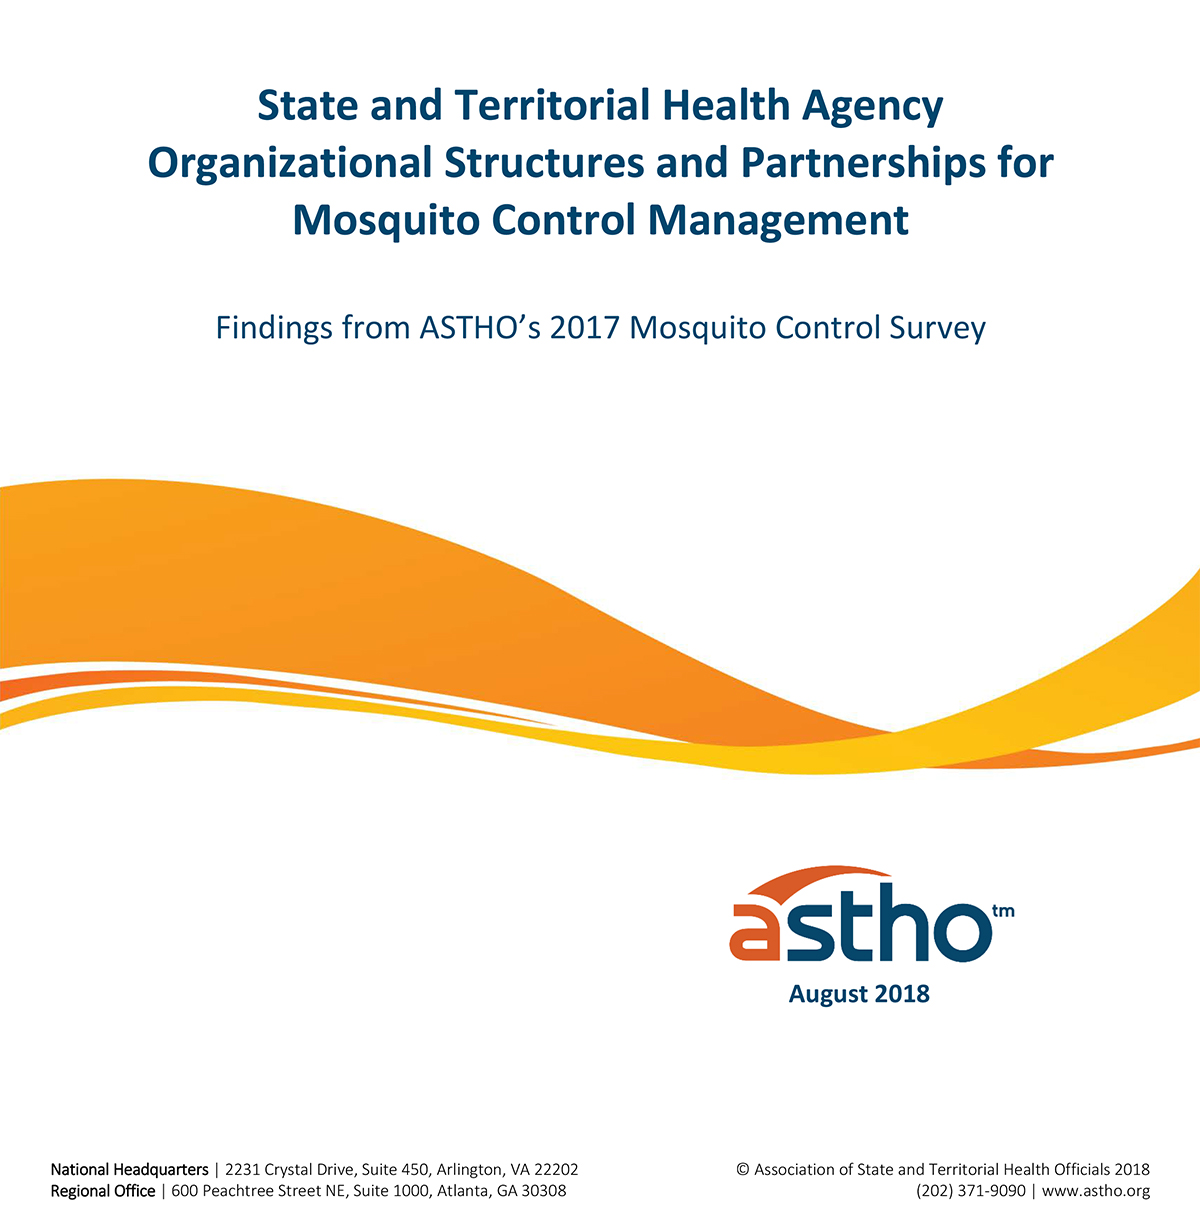 State and Territorial Health Agency Organizational Structures and Partnerships for Mosquito Control Management